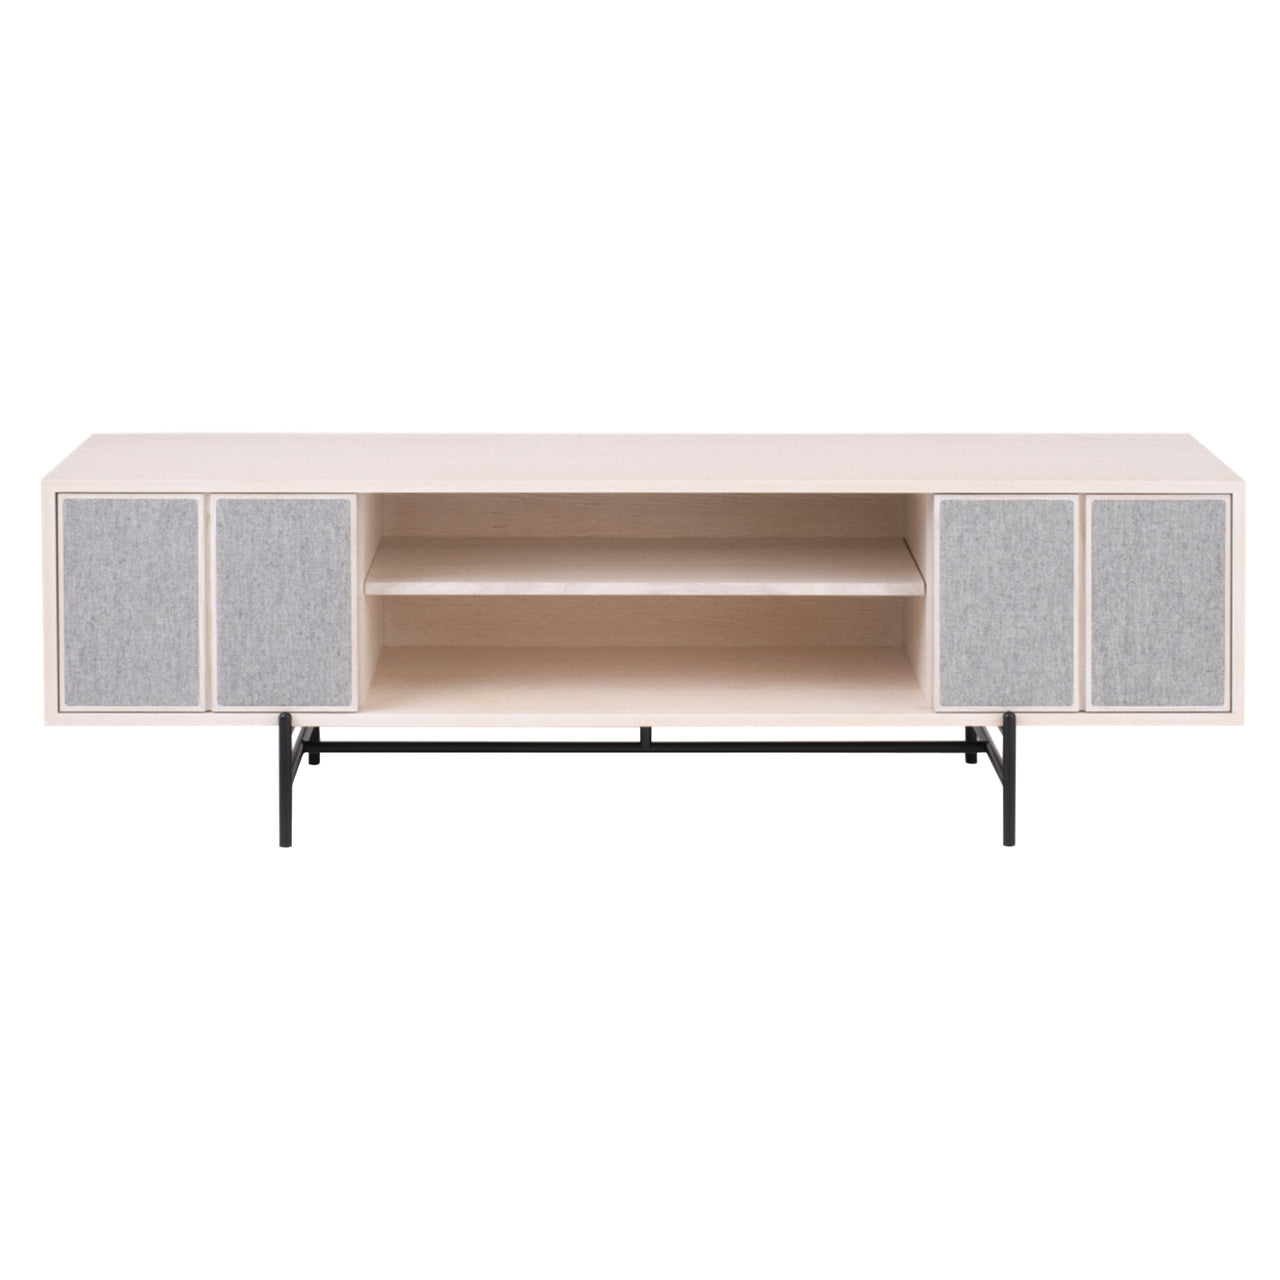 Canvas Media Unit Upholstery: Off White